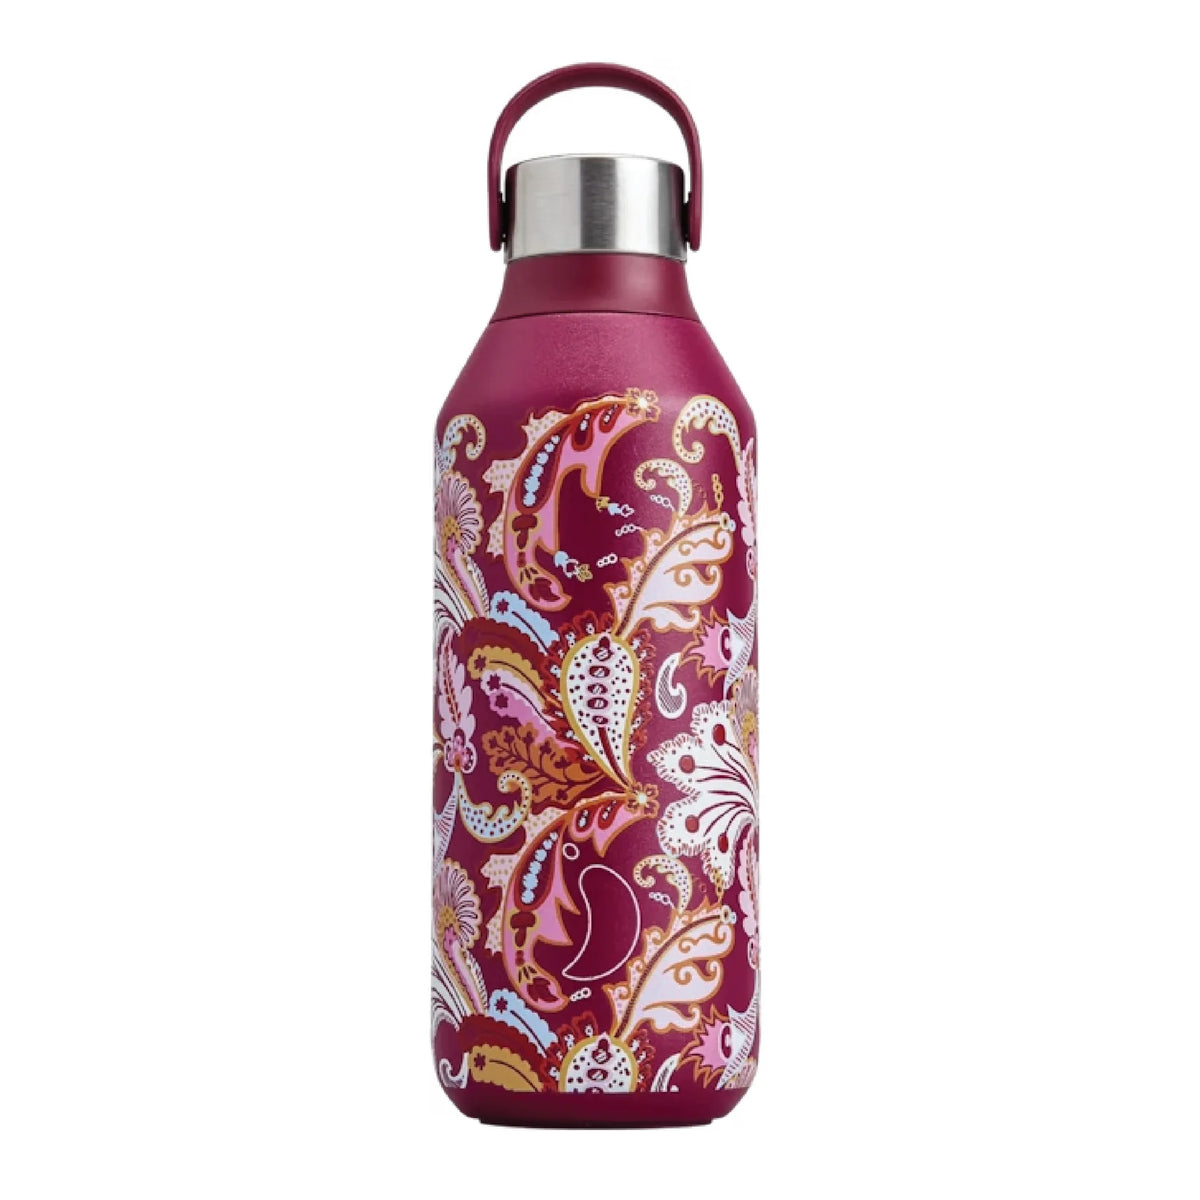 Series 2 Liberty 500ml Bottle - Concerto Feather